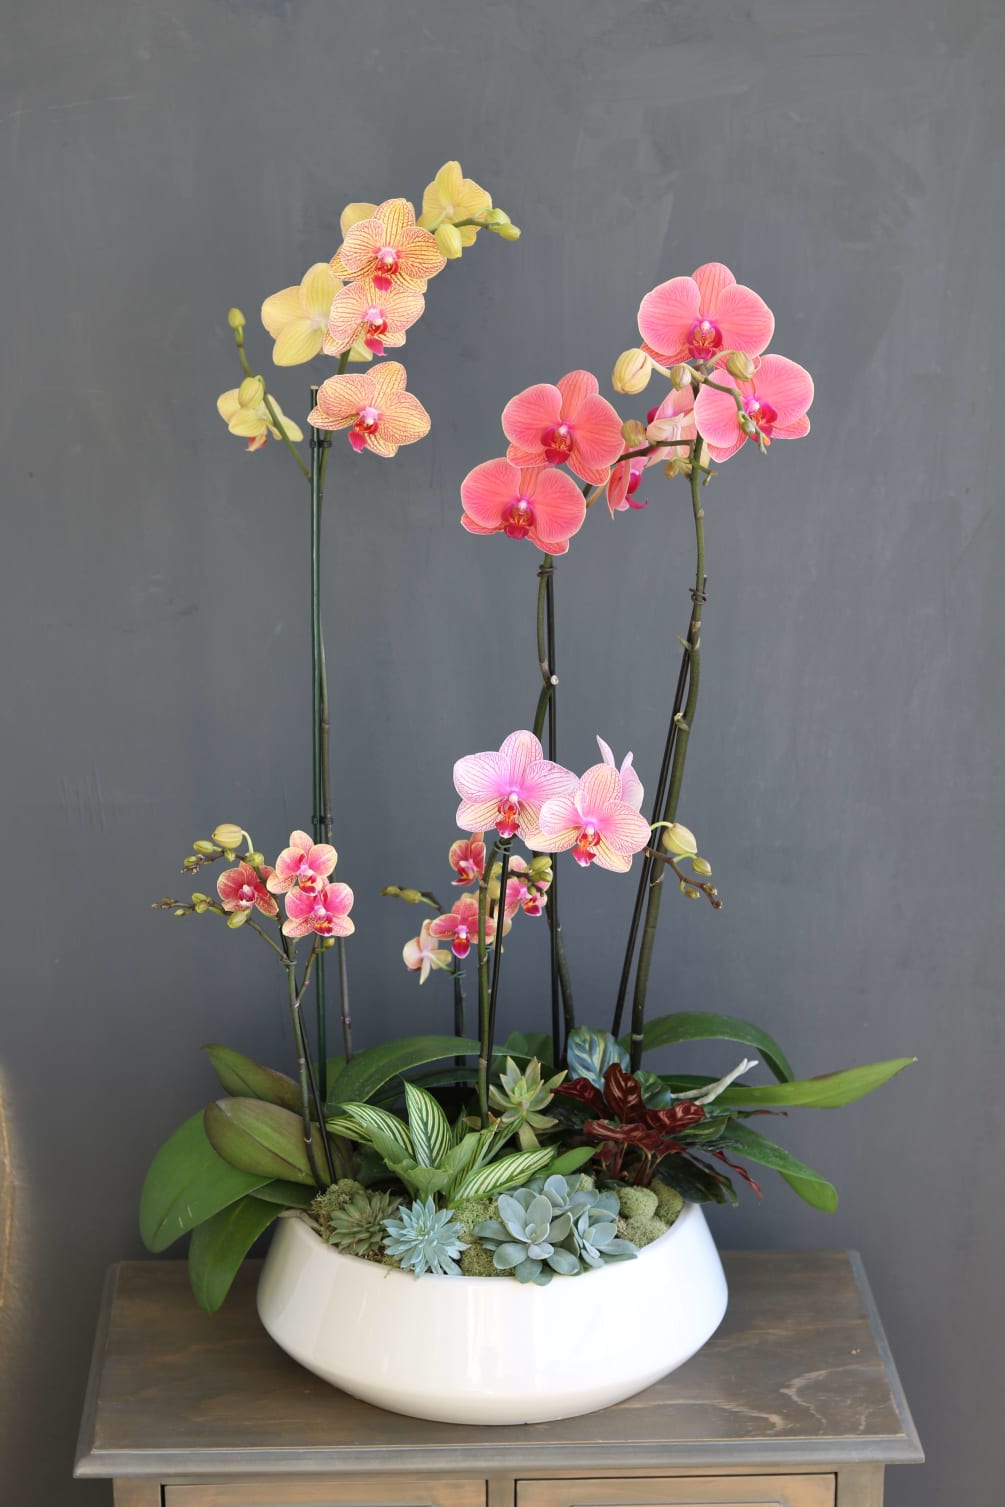 Combination of bright phalaenopsis orchids and succulents planted in white ceramic planter.